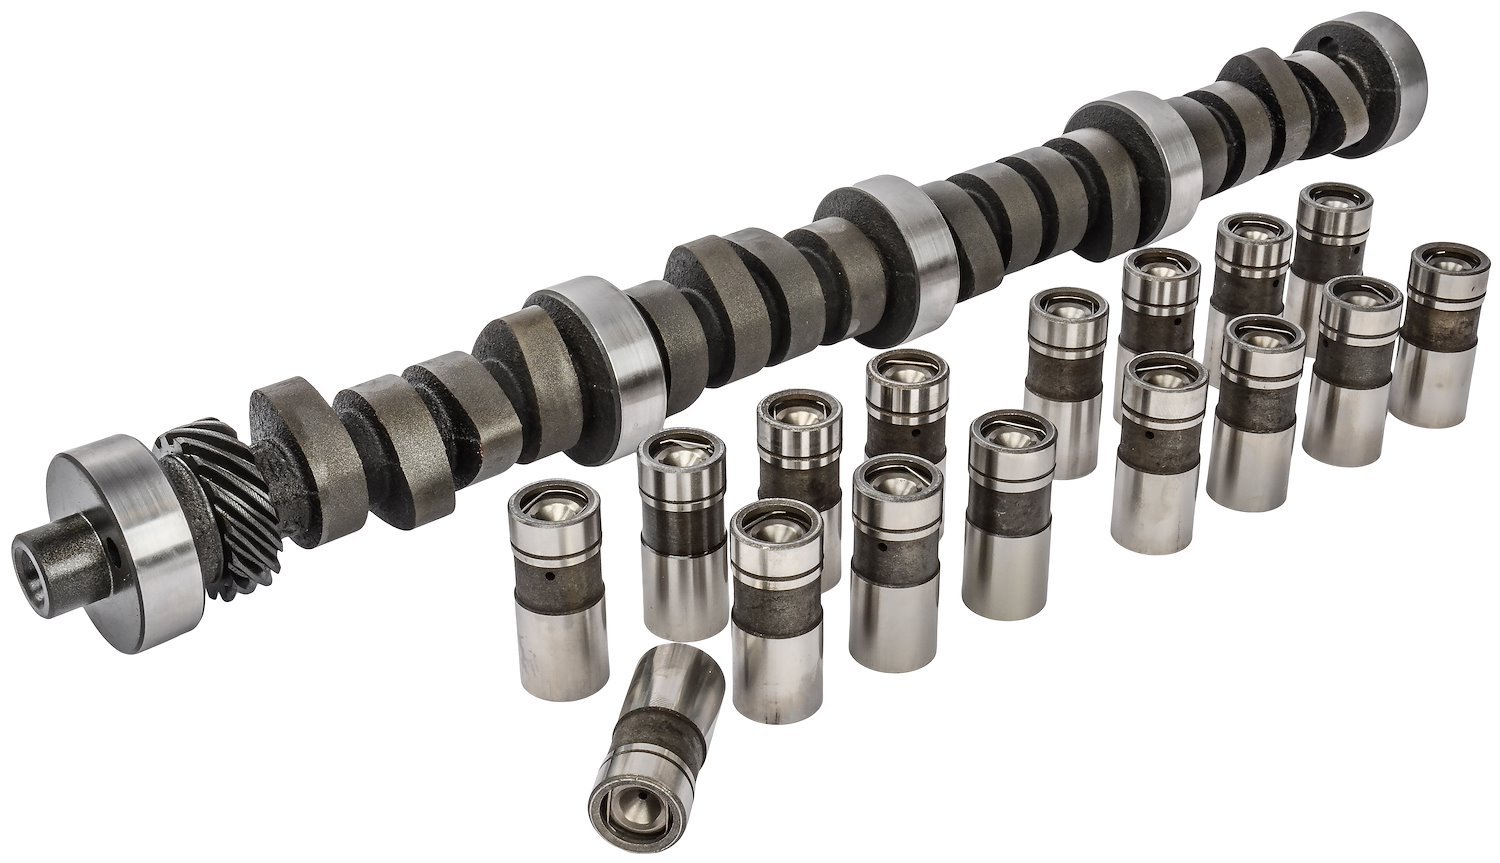 Hydraulic Flat Tappet Camshaft & Lifters for 1962-Up Ford 221-302 (except 302 HO)